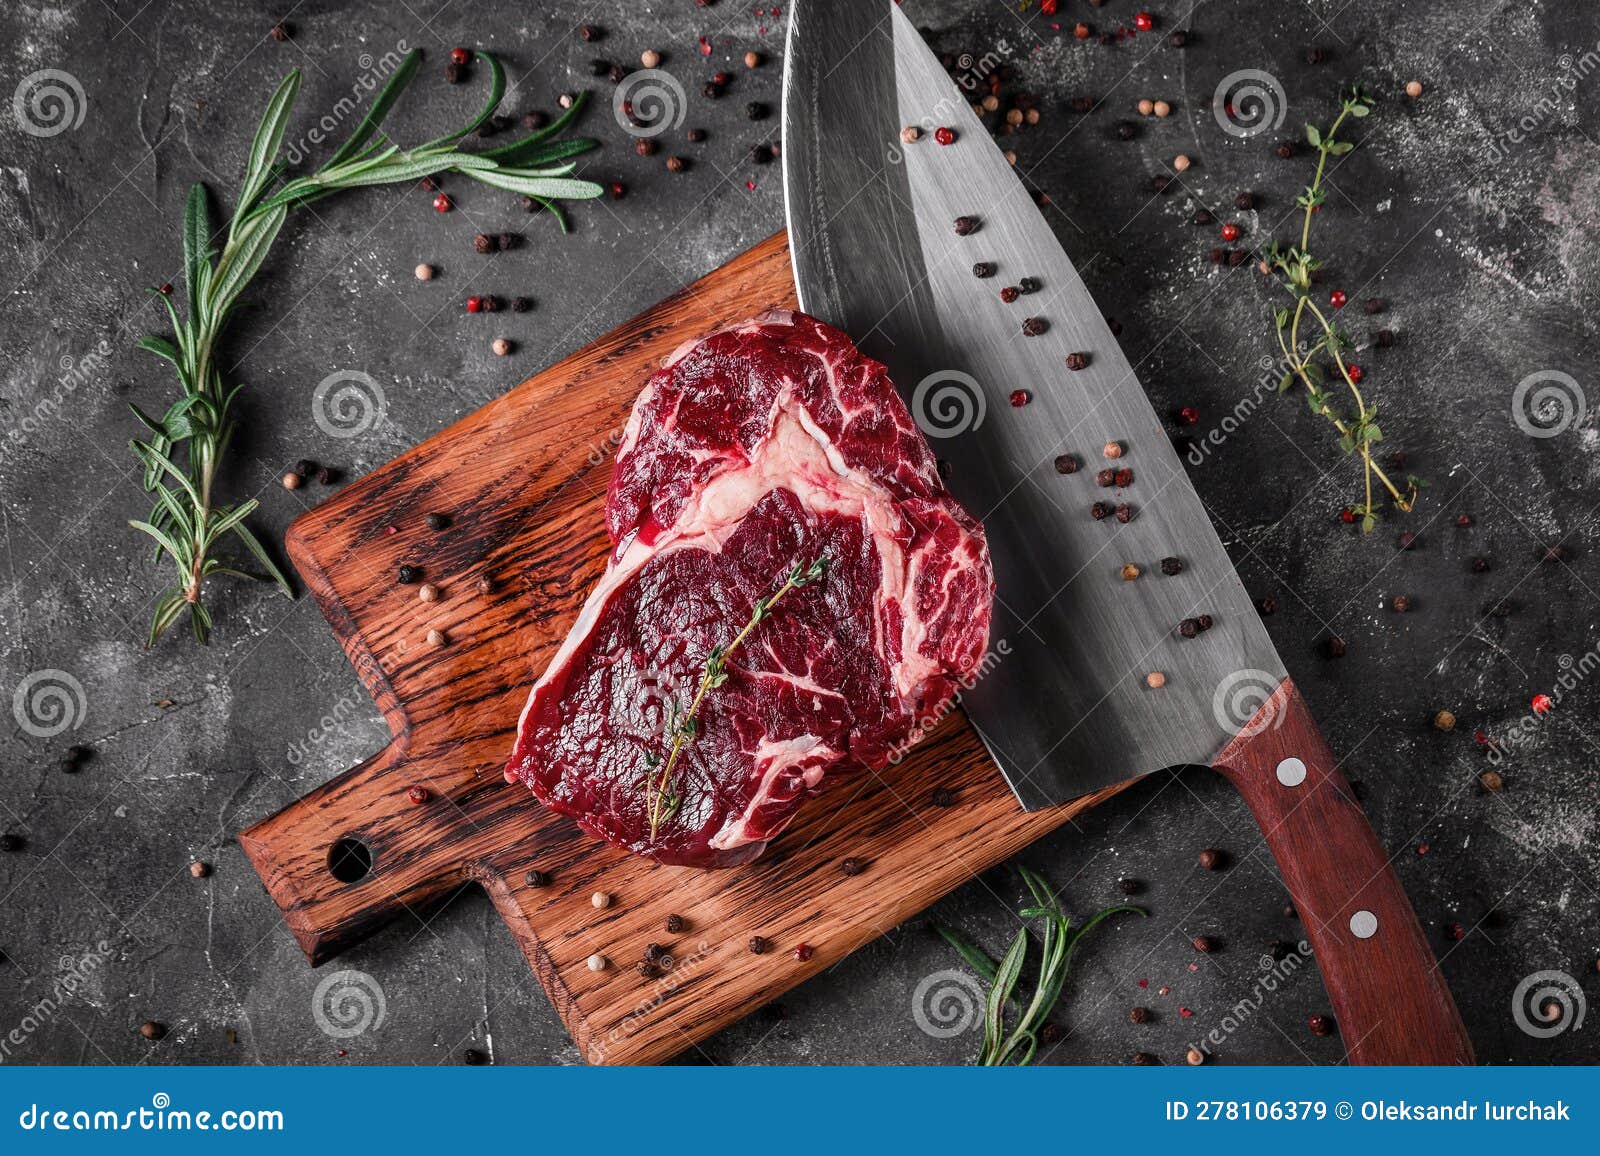 Meat Processing Plant. Carcasses of Beef Hang on Hooks Stock Image ...